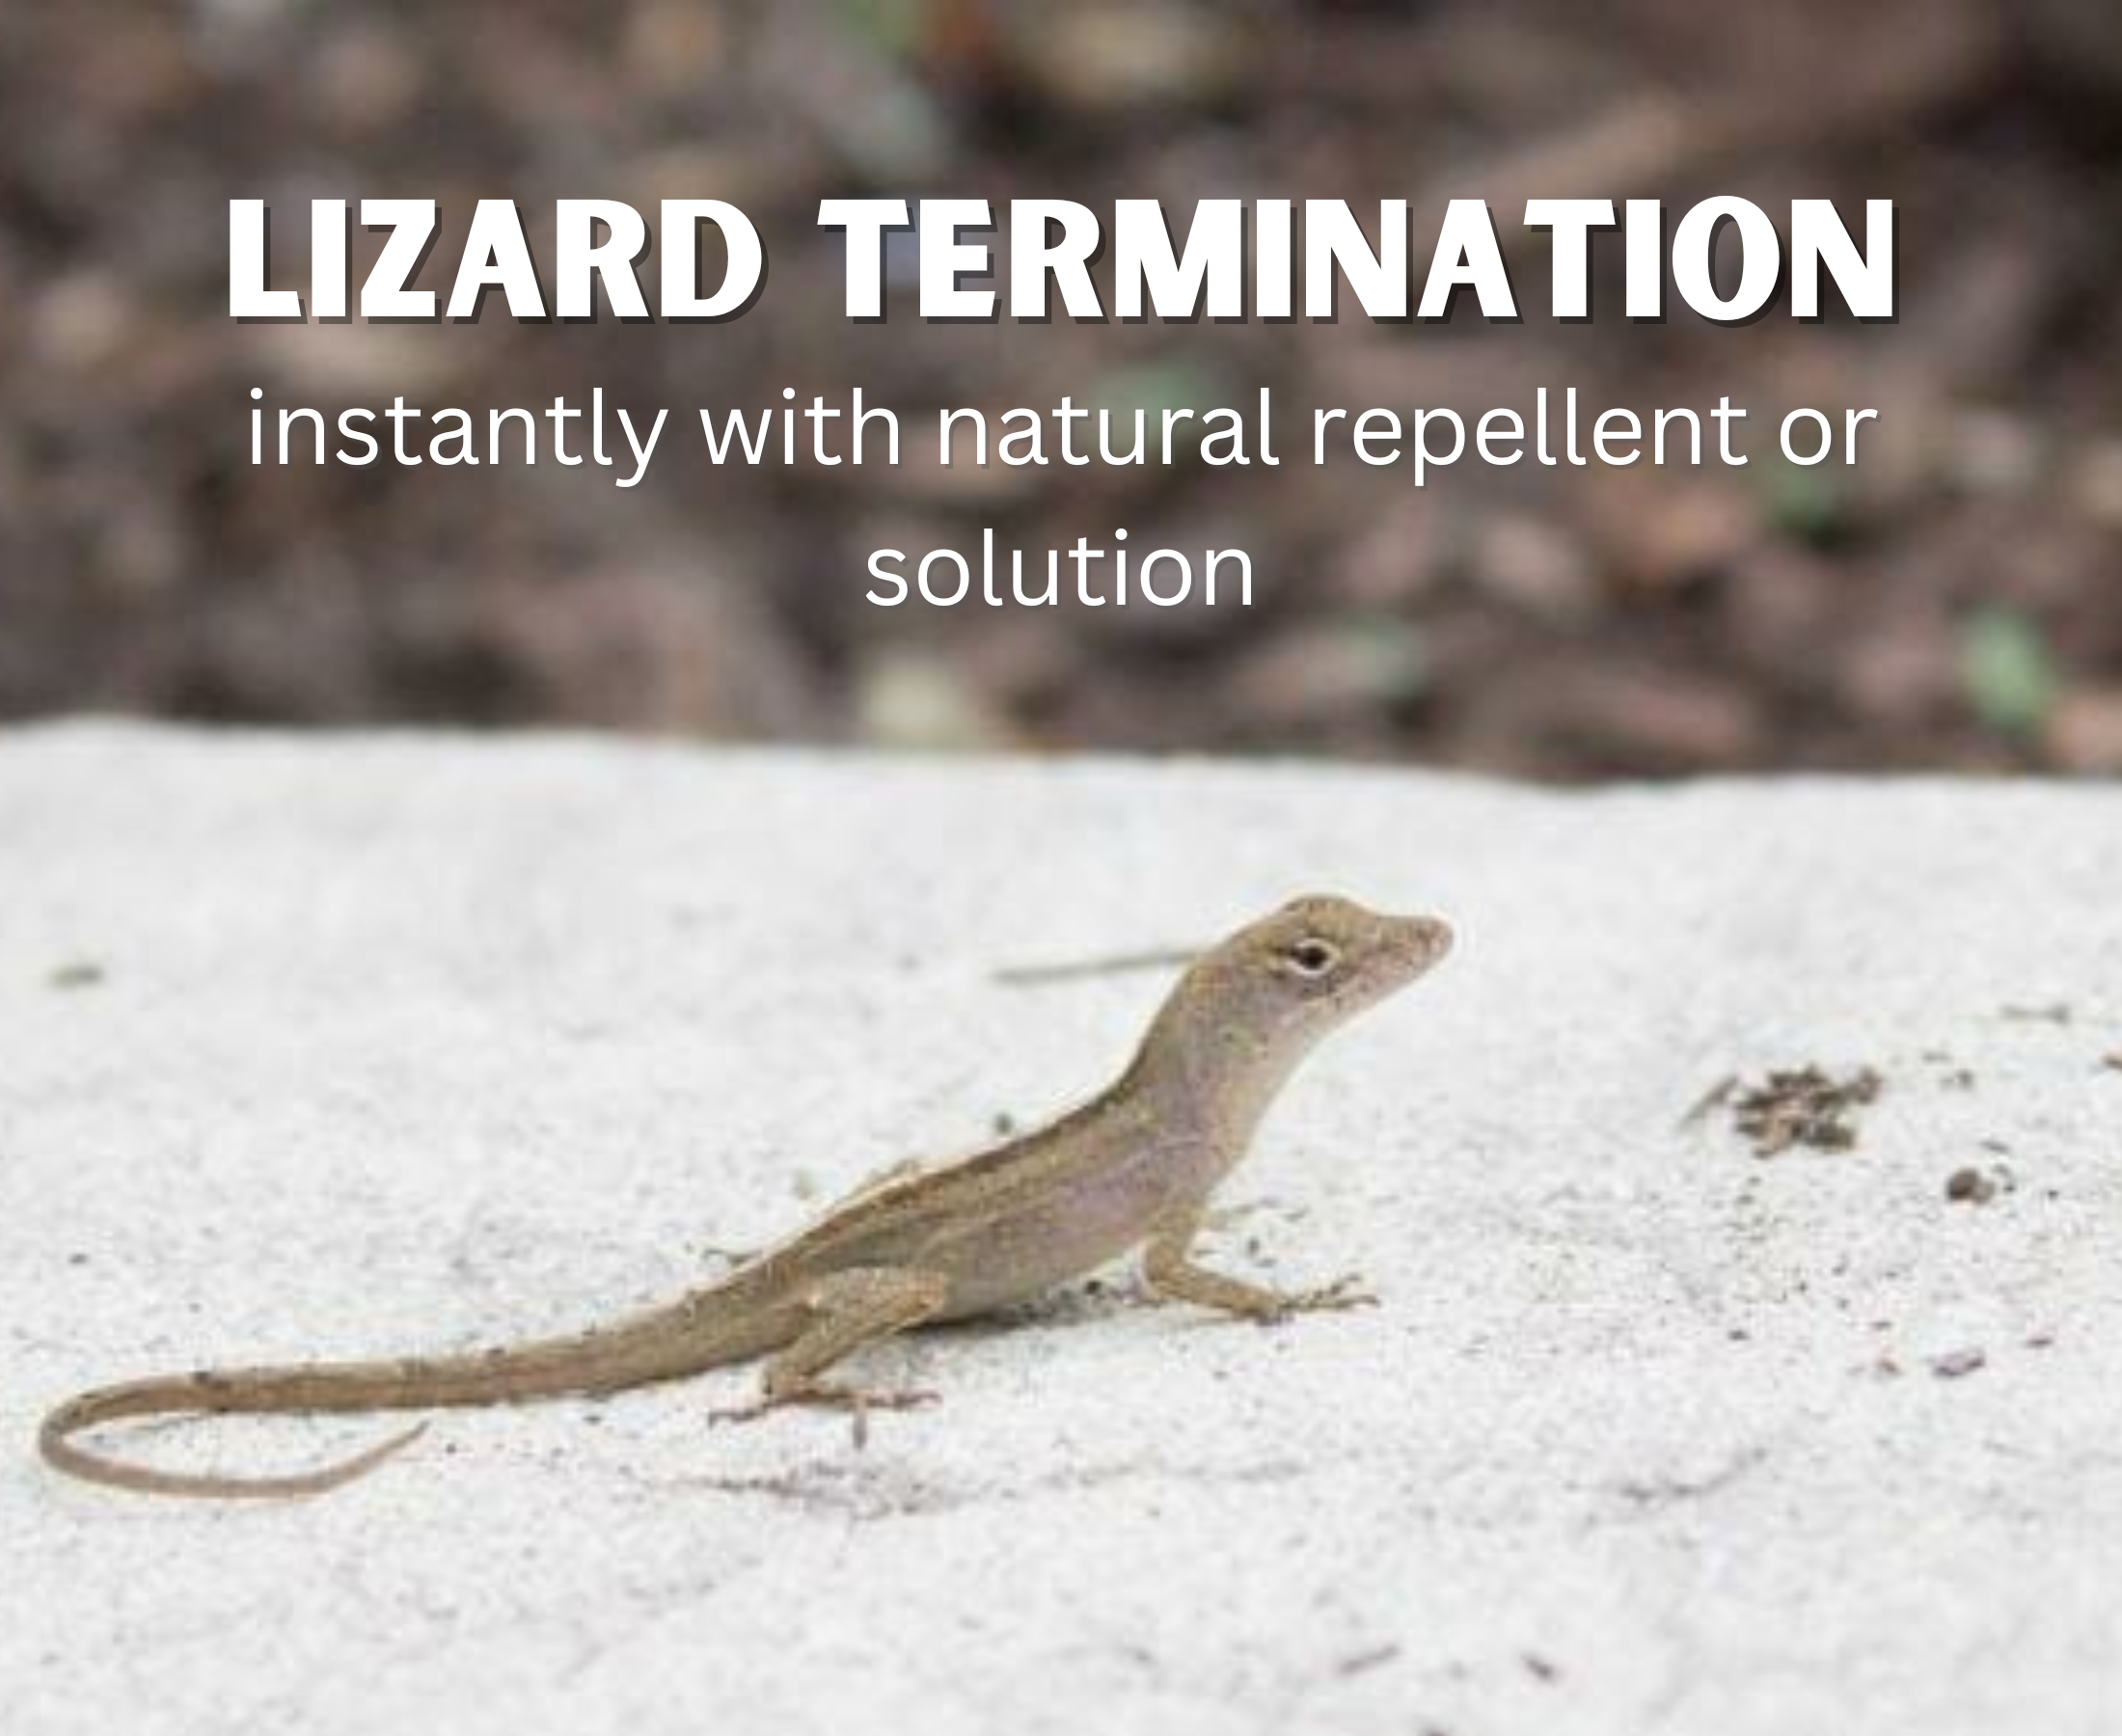 What will kill the lizard instantly and naturally?